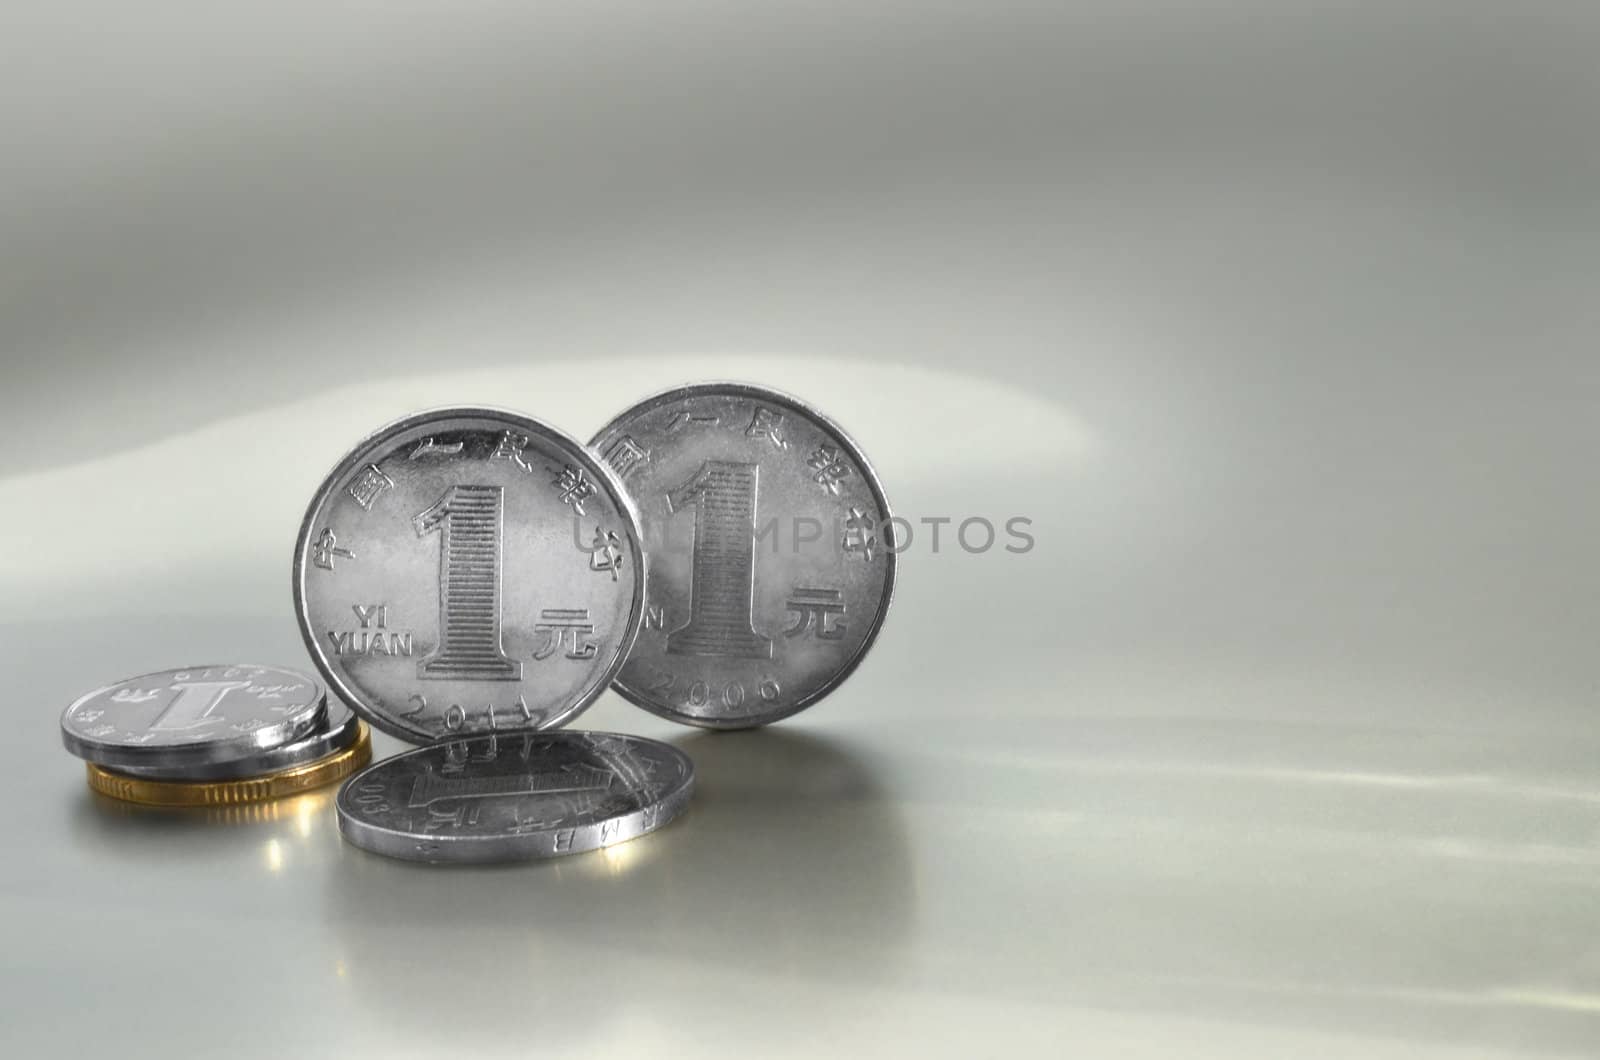 Chinese coins by Vectorex